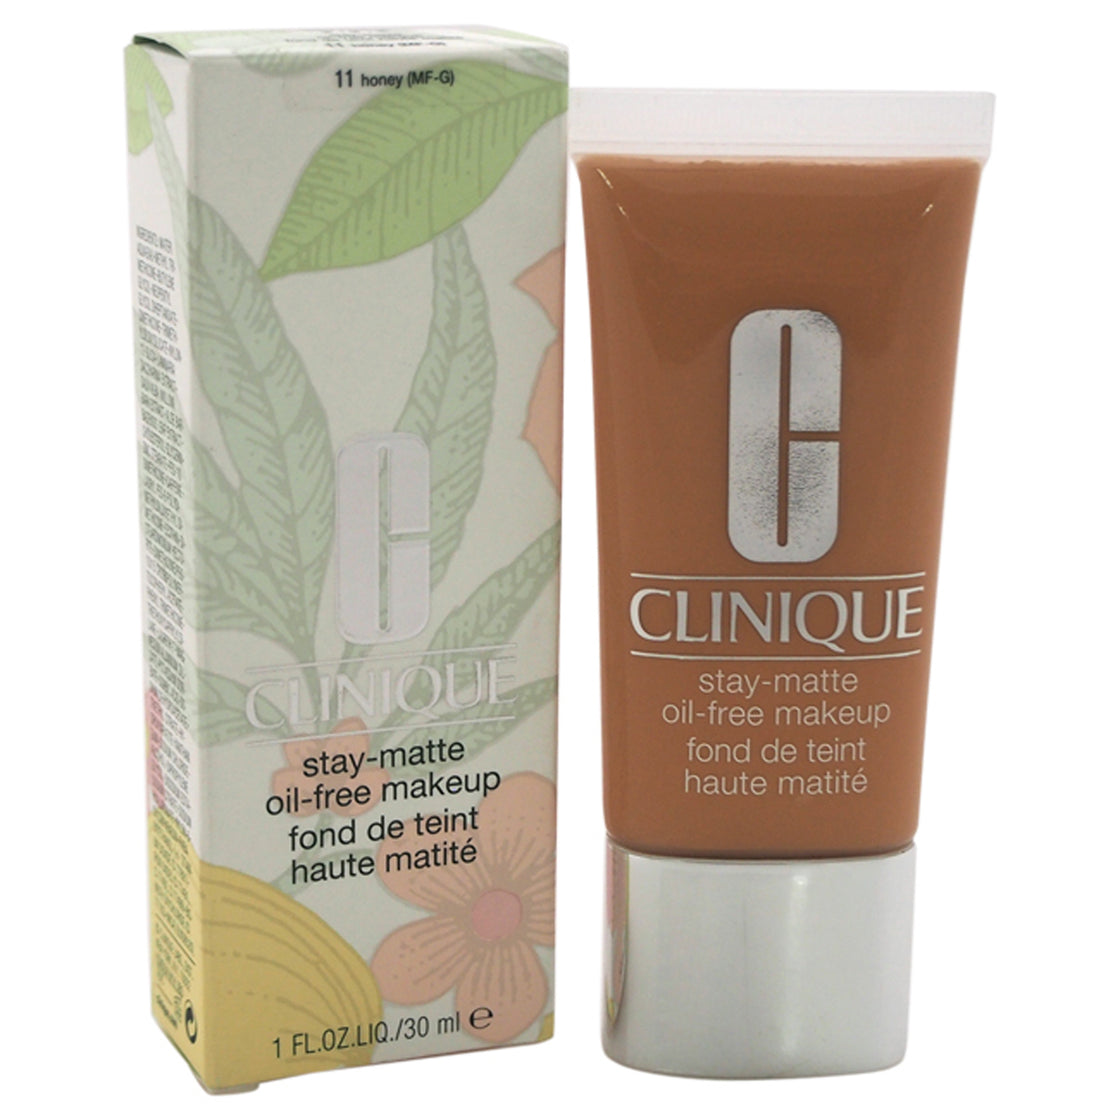 Stay-Matte Oil-Free Makeup - 11 Honey (MF-G) - Dry Combination To Oily by Clinique for Women - 1 oz Makeup